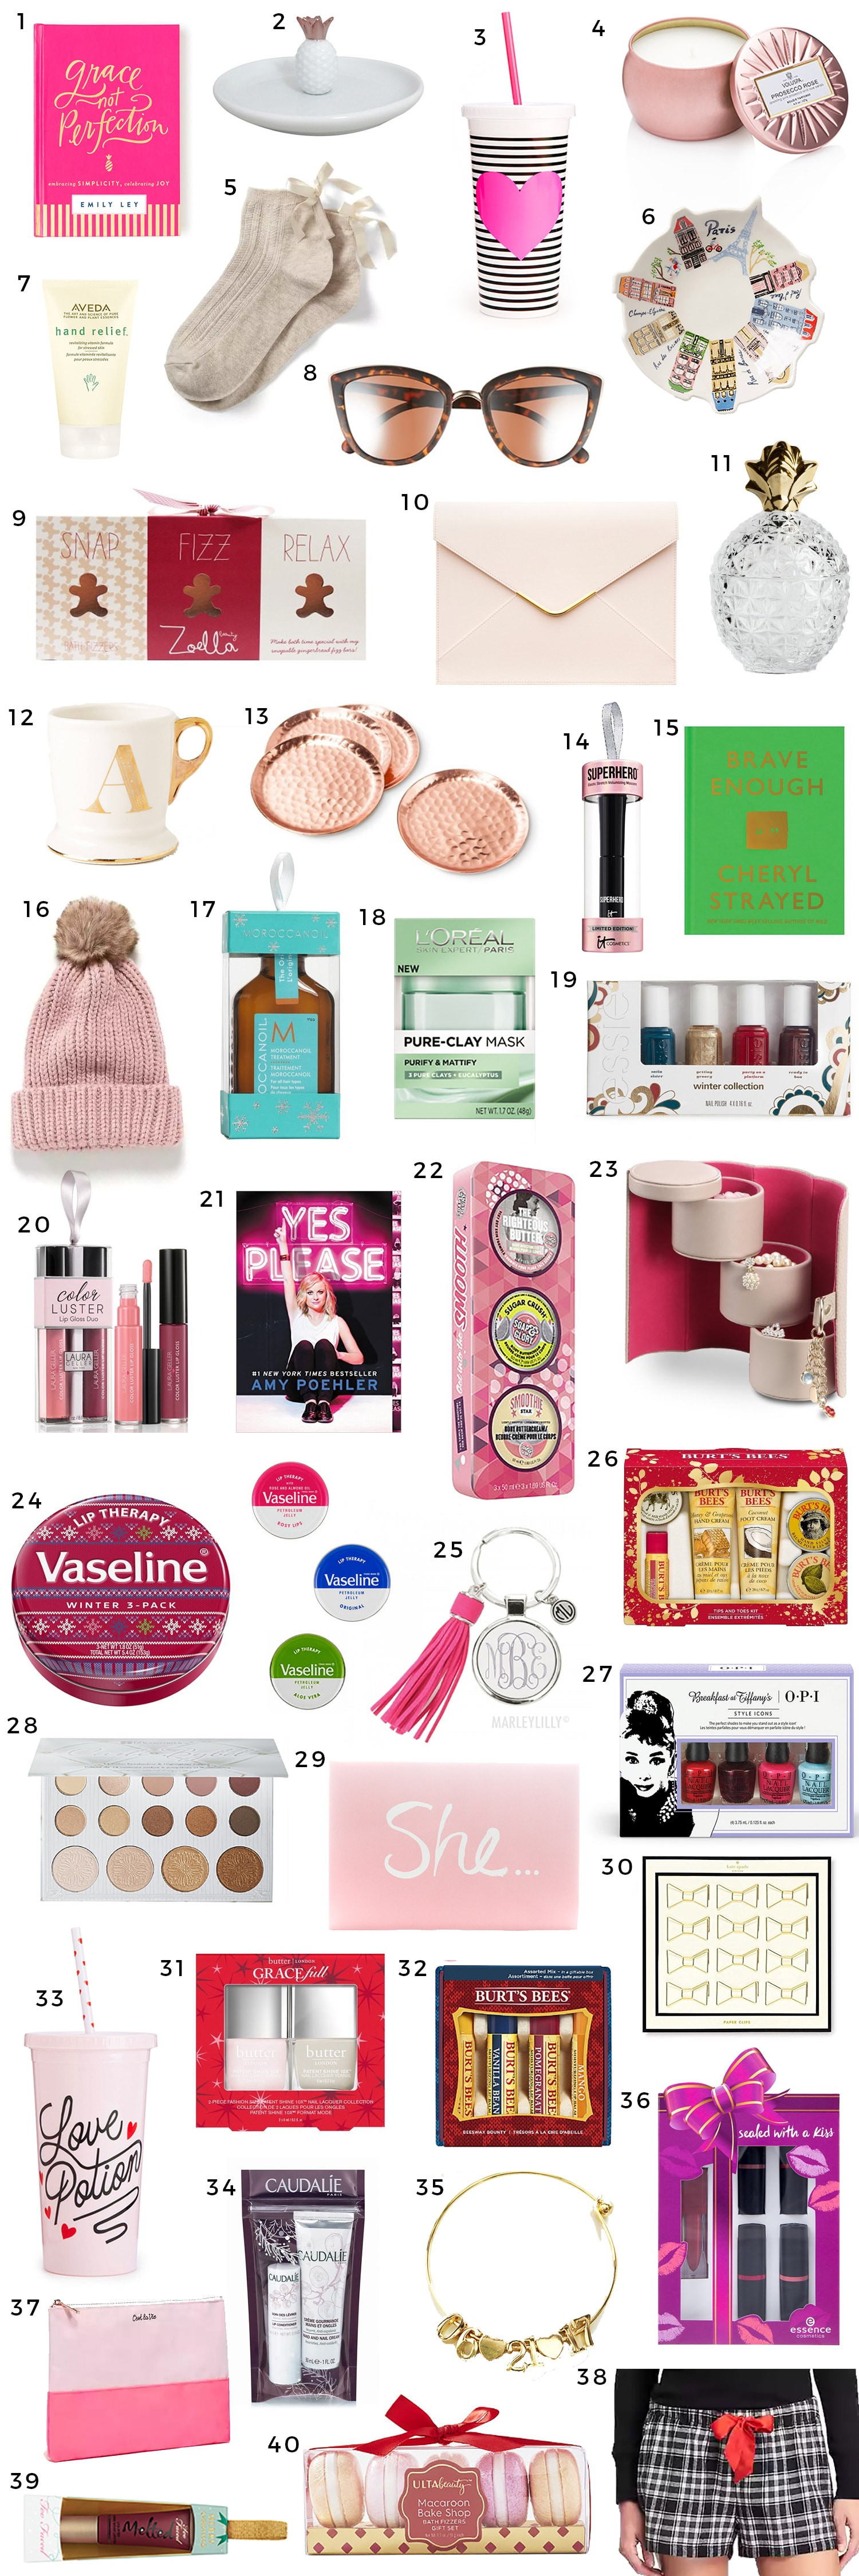 Top Christmas Gift Ideas
 The Best Christmas Gift Ideas for Women Under $15